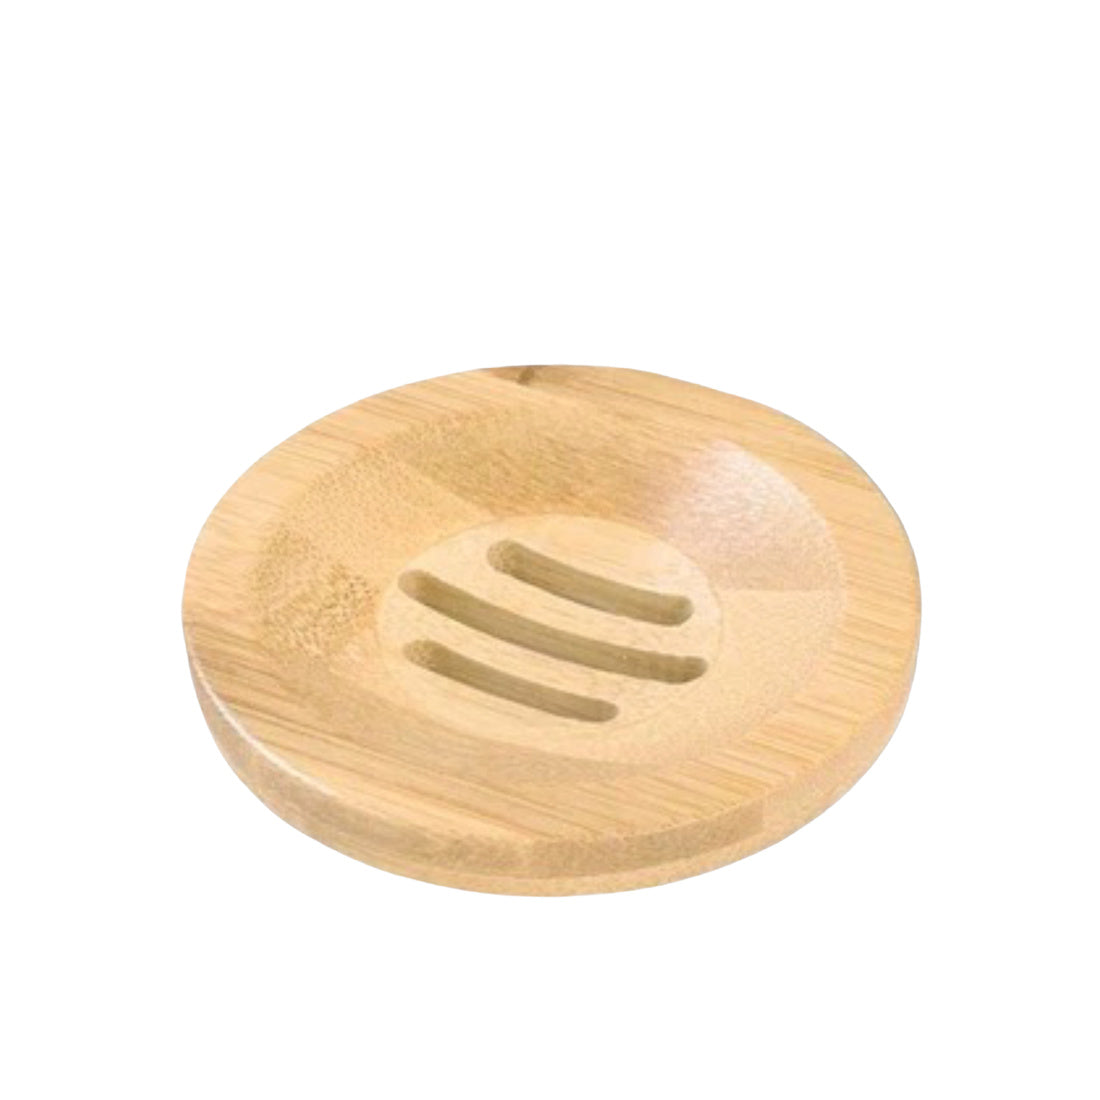 A circular Odds & Ends wooden shower steamer tray with three grooves in the center, set against a plain white background.